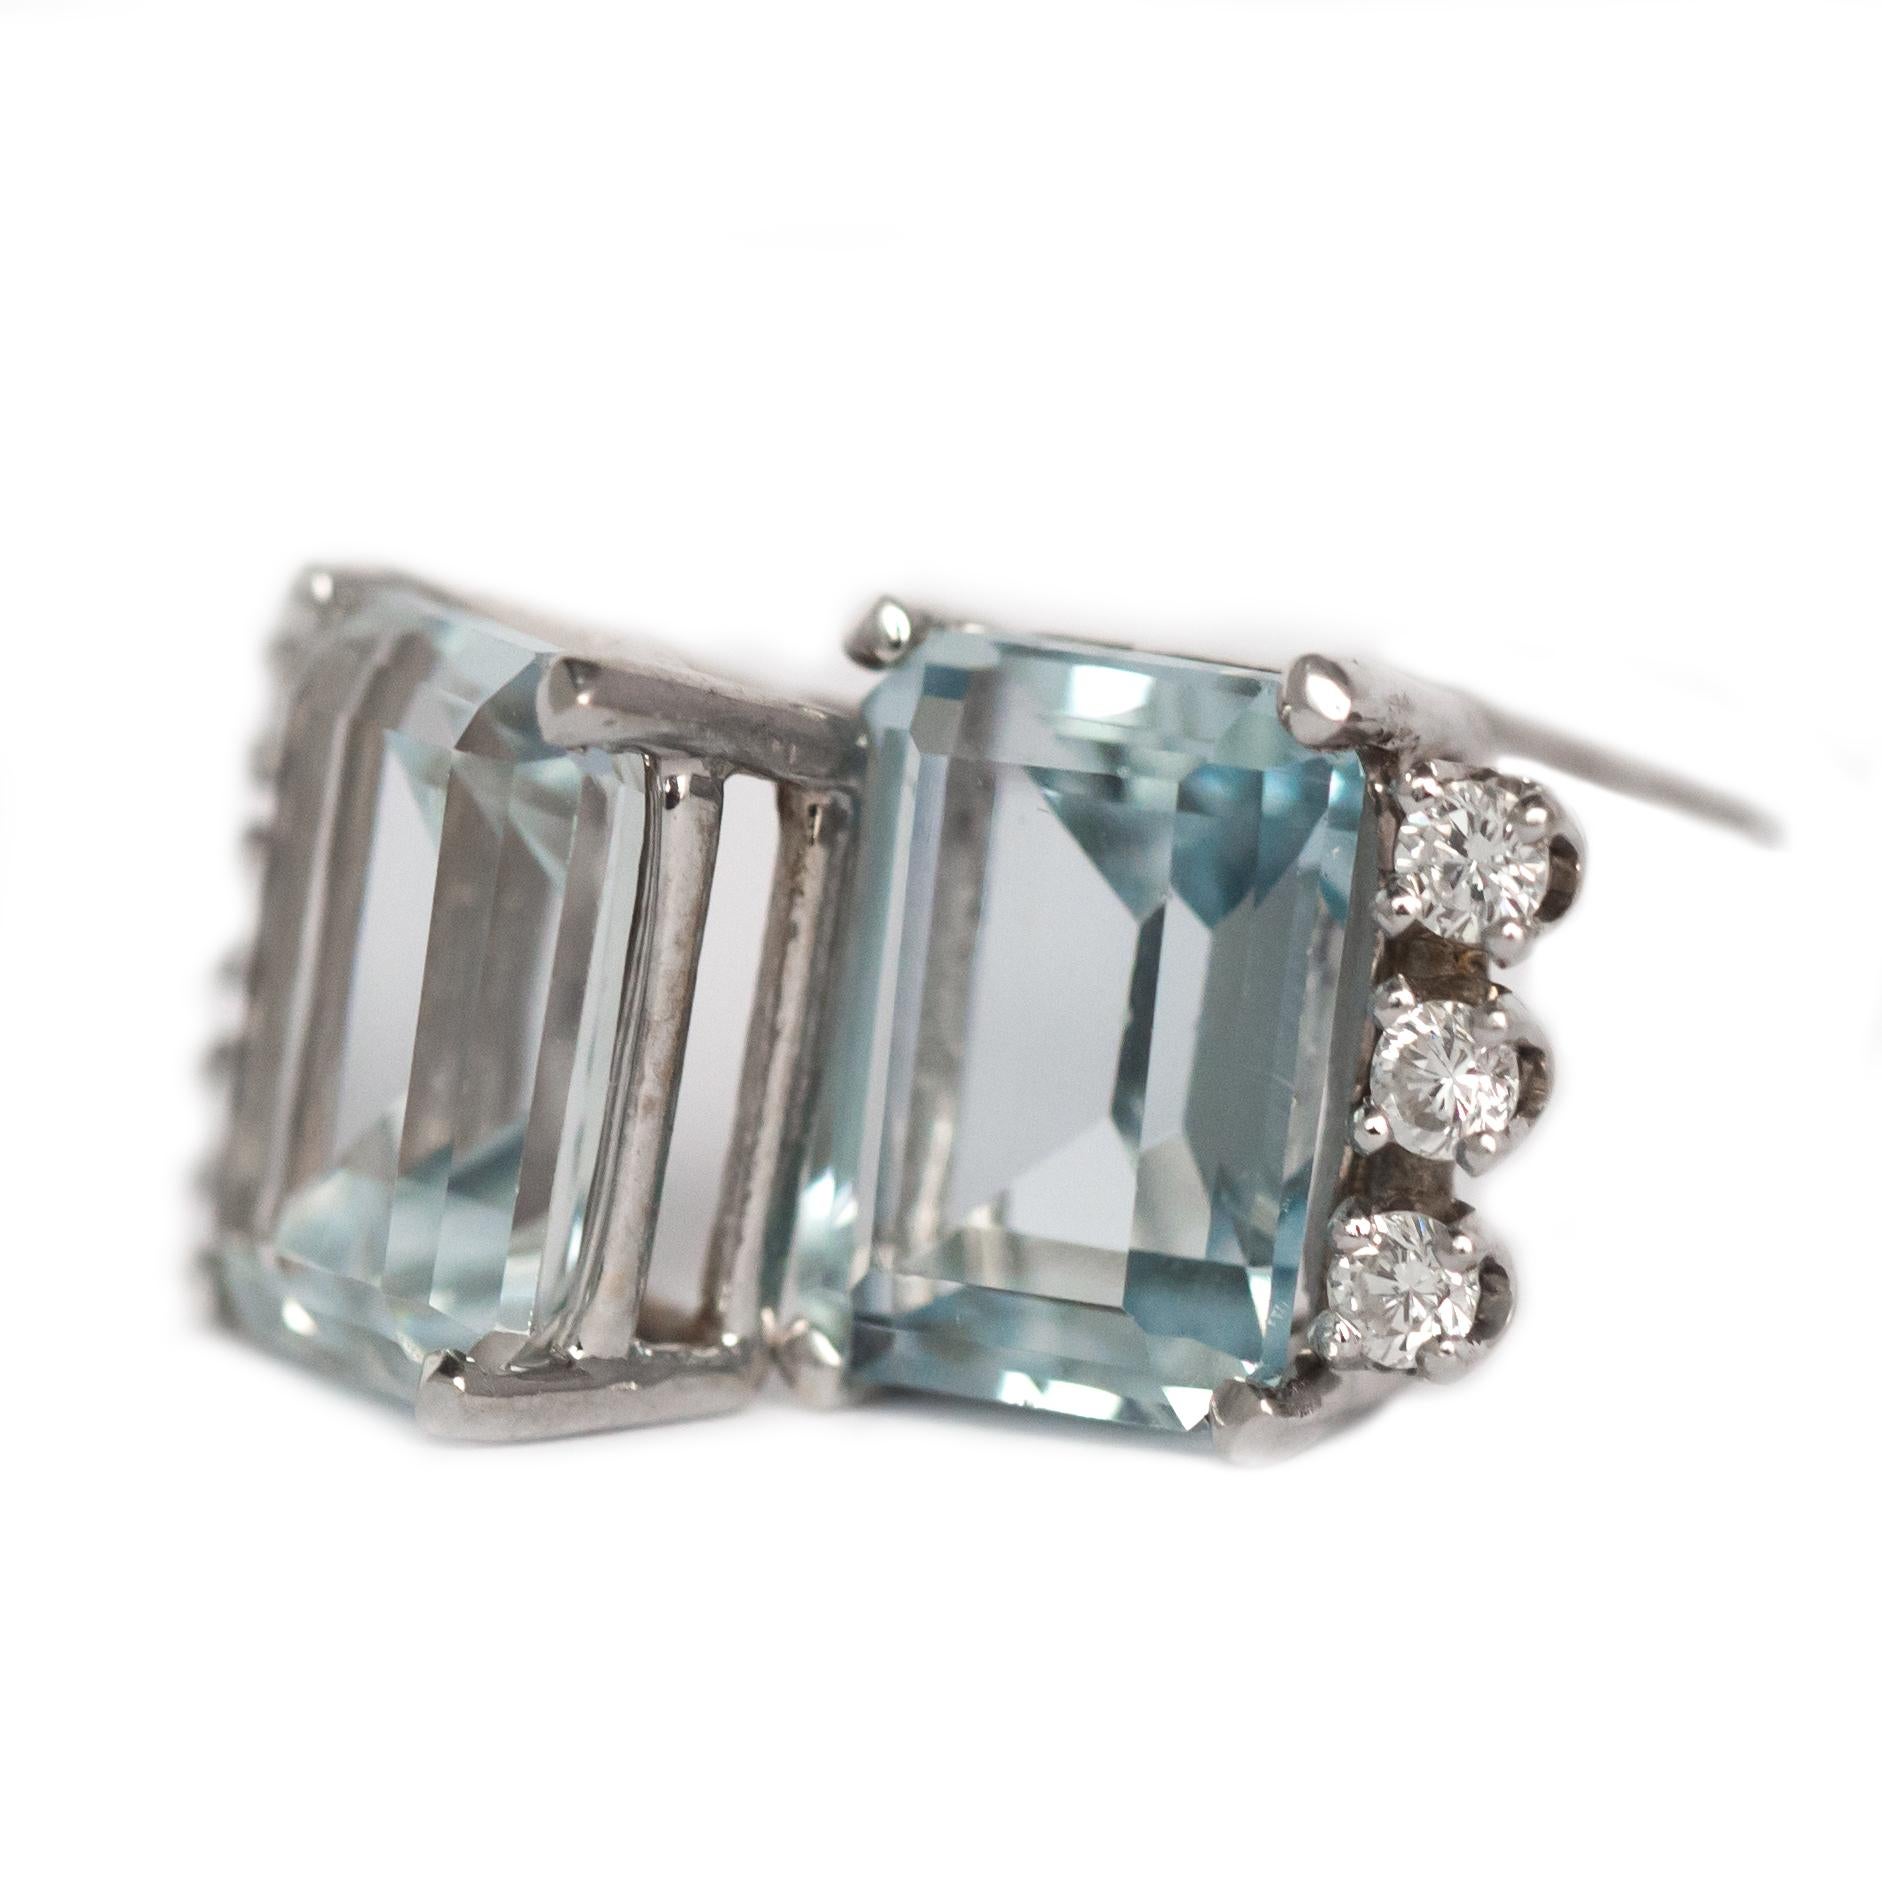 Item Details: 
Metal Type: 14K White Gold
Weight: 2.2 grams (total)

Color Stone Details: 
Type: Aquamarine, natural
Carat Weight: 6 carat, total weight.
Color: Light Blue

Side Stone Details: 
Shape: Single Cut
Total Carat Weight: .12 carat, total